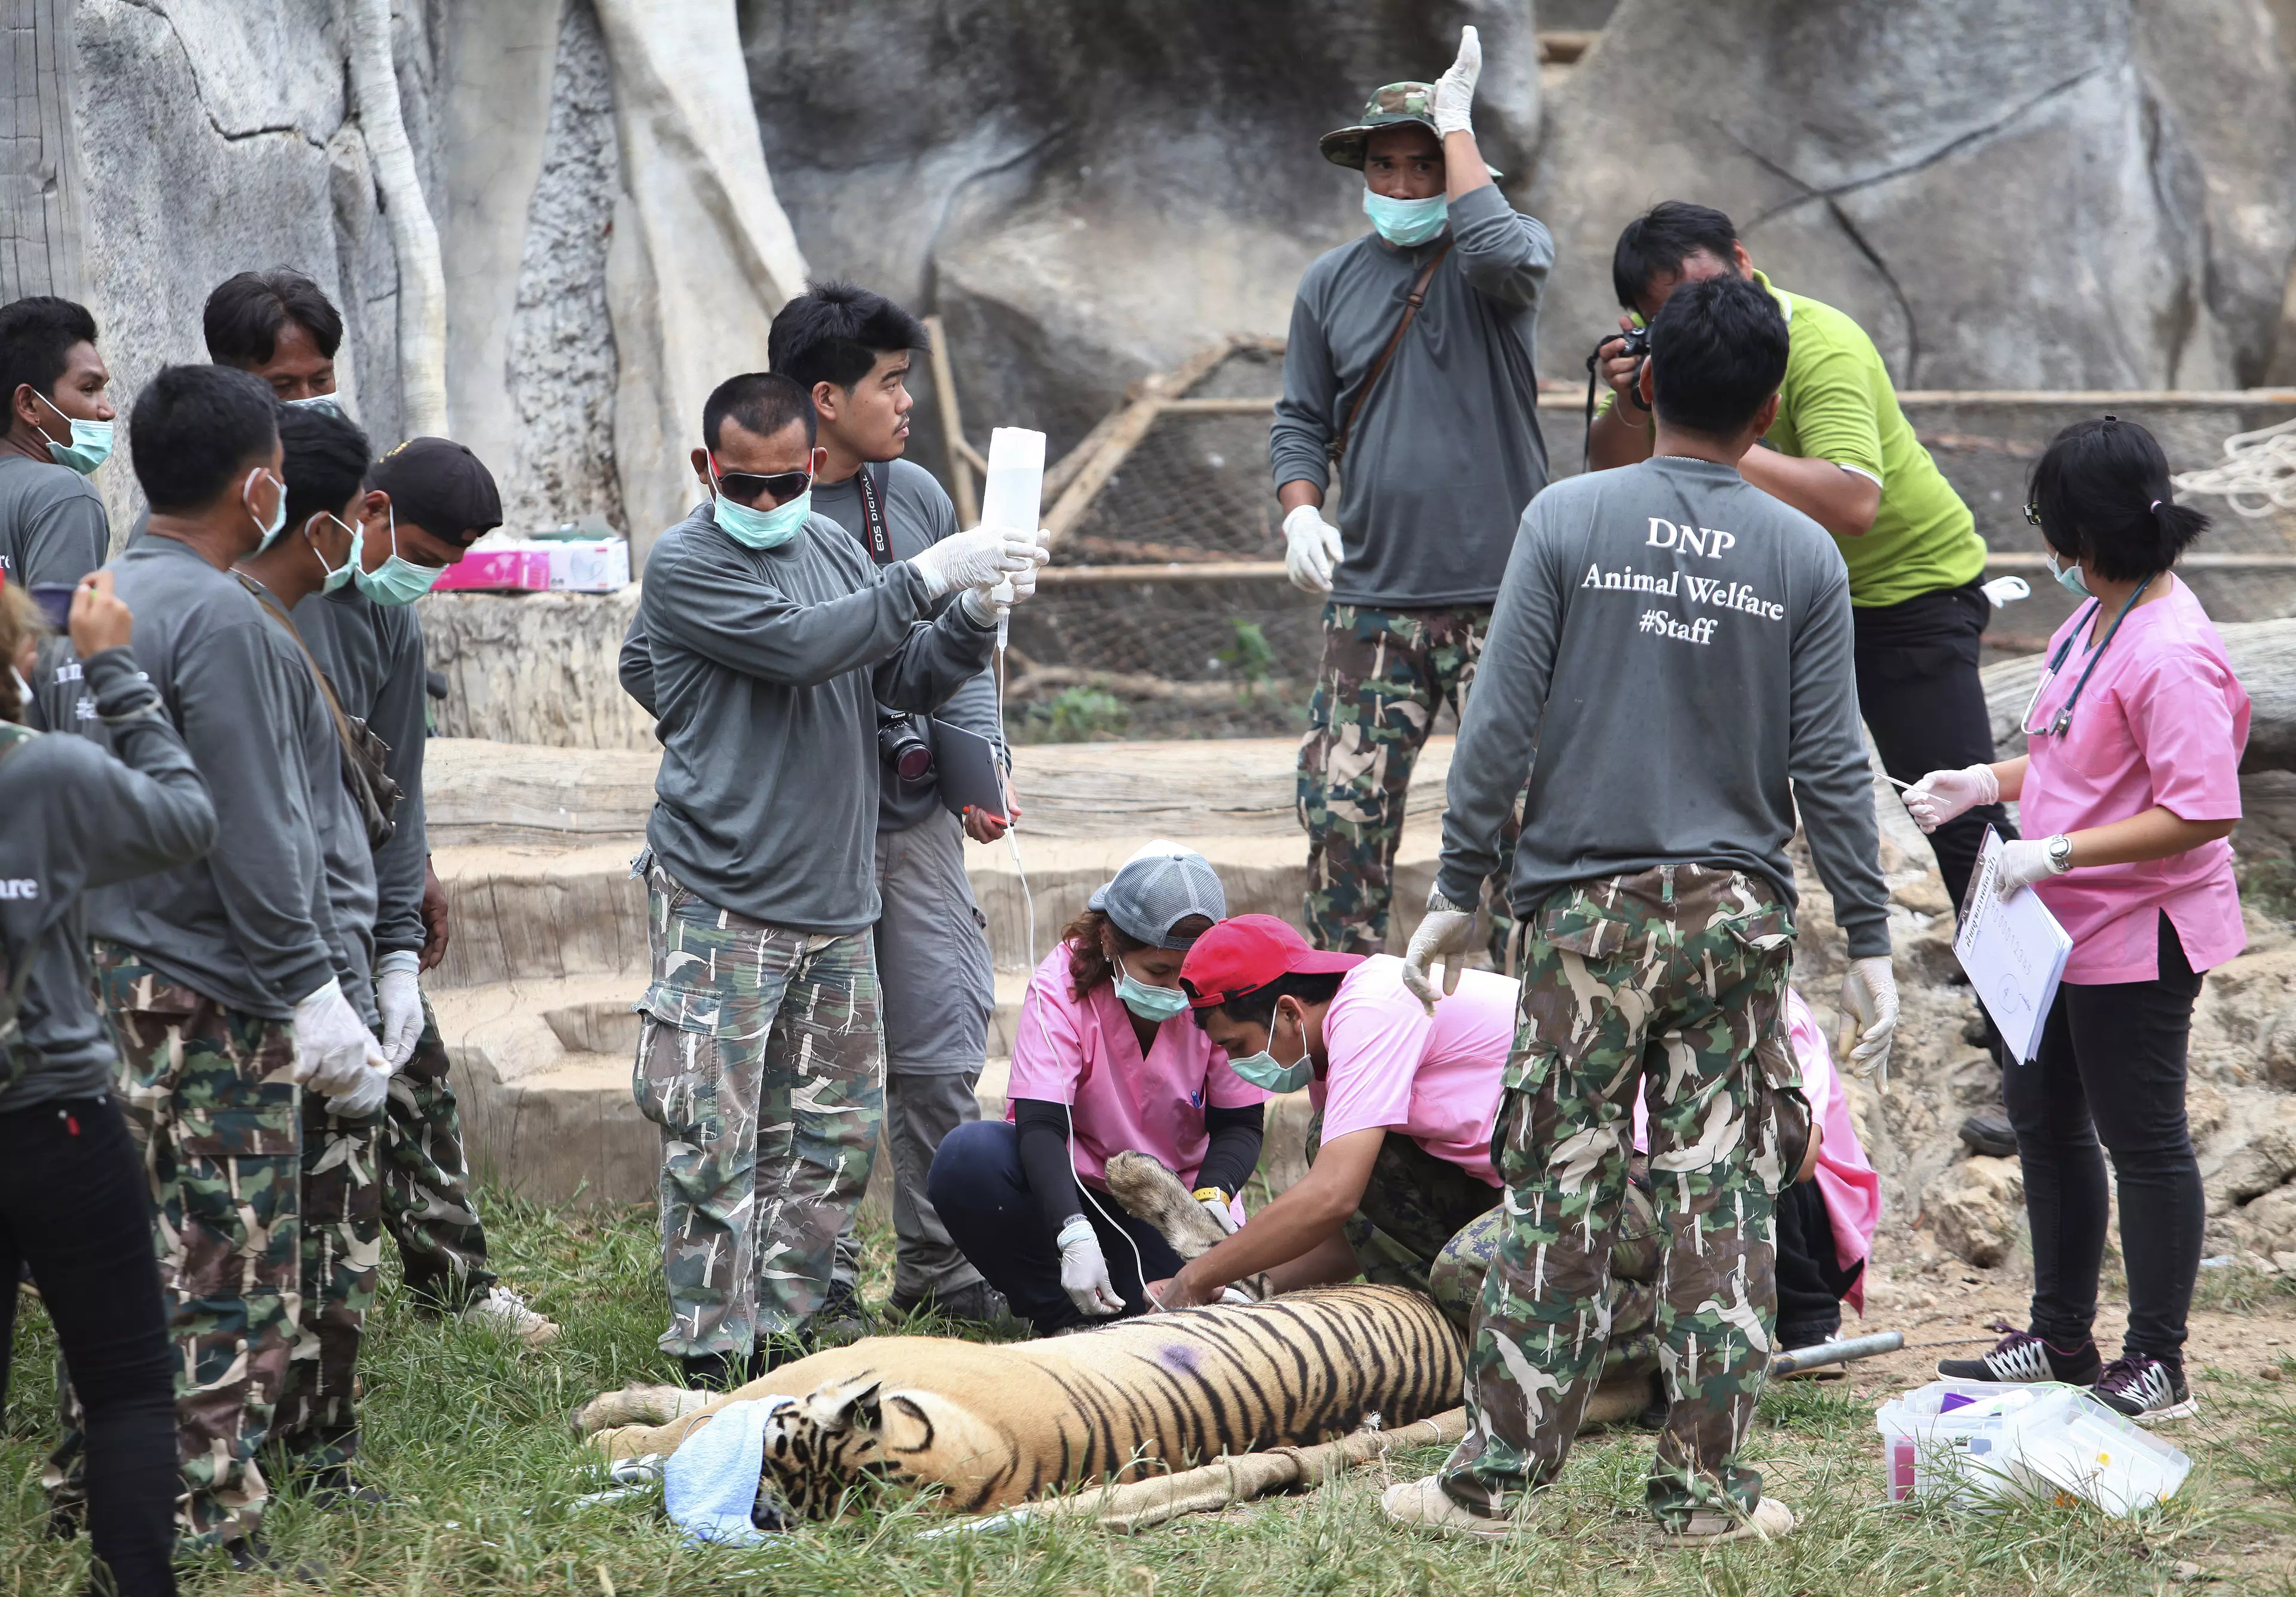 Authorities removed 147 tigers from the temple in 2016.